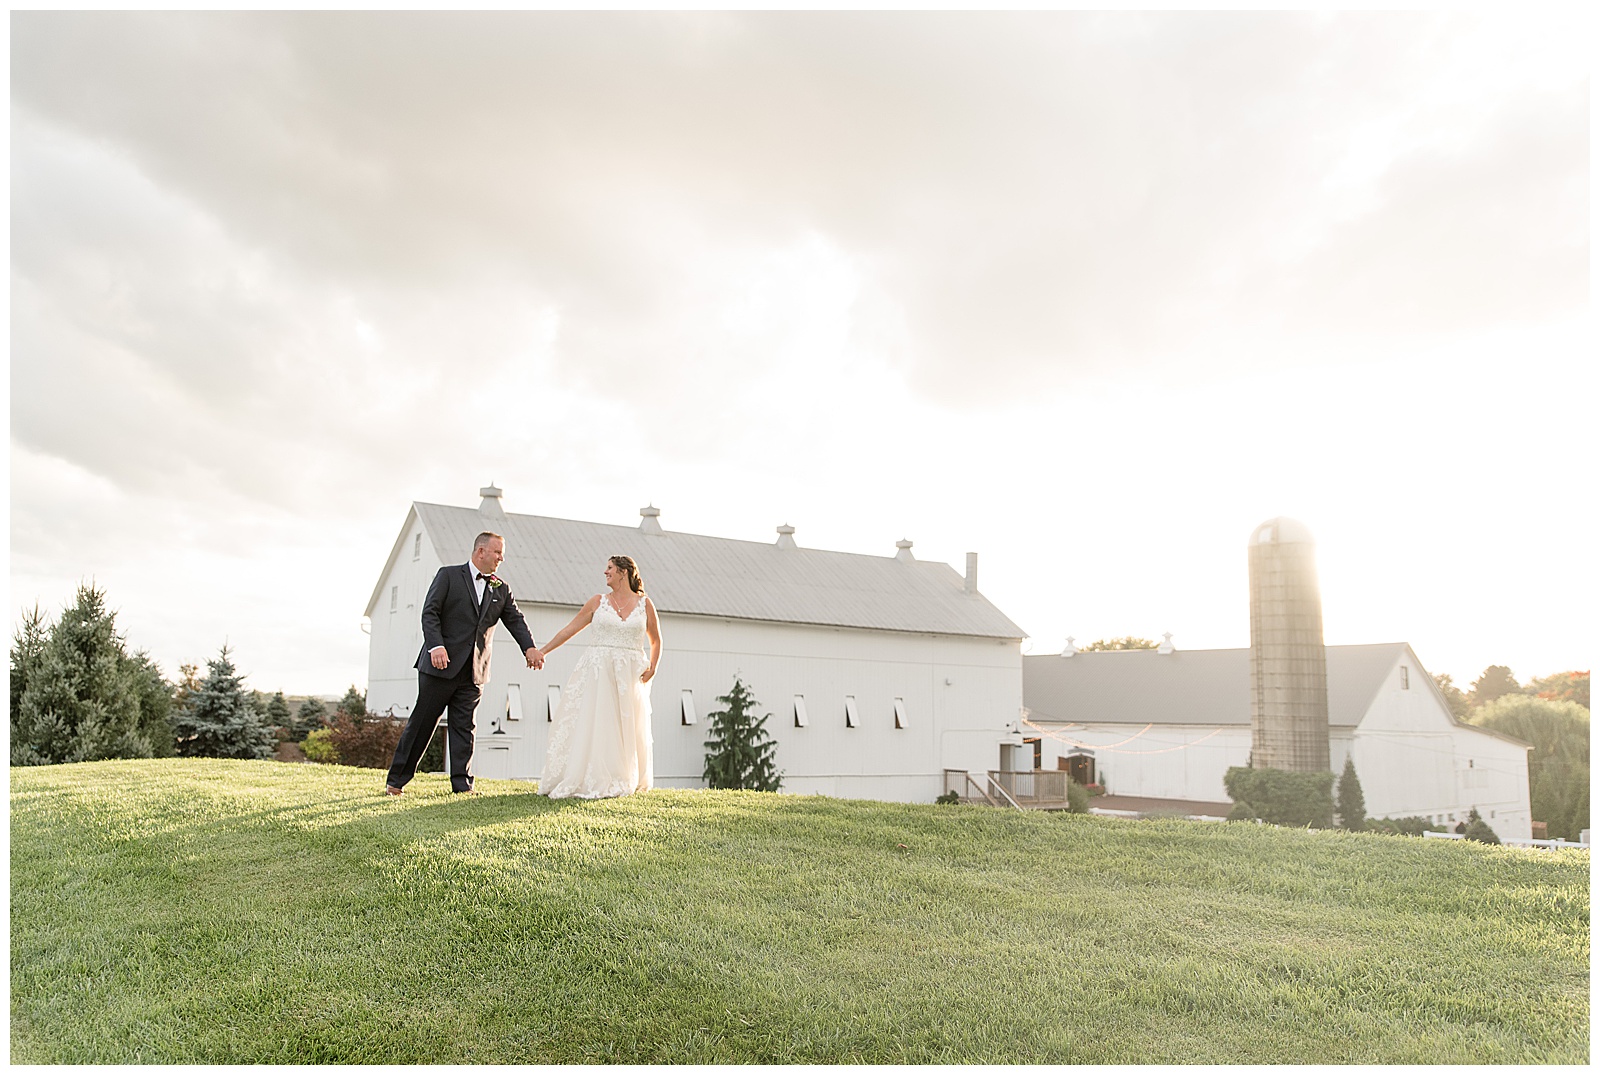 bride and groom walking on grass mound overlooking venue with sun setting behind them